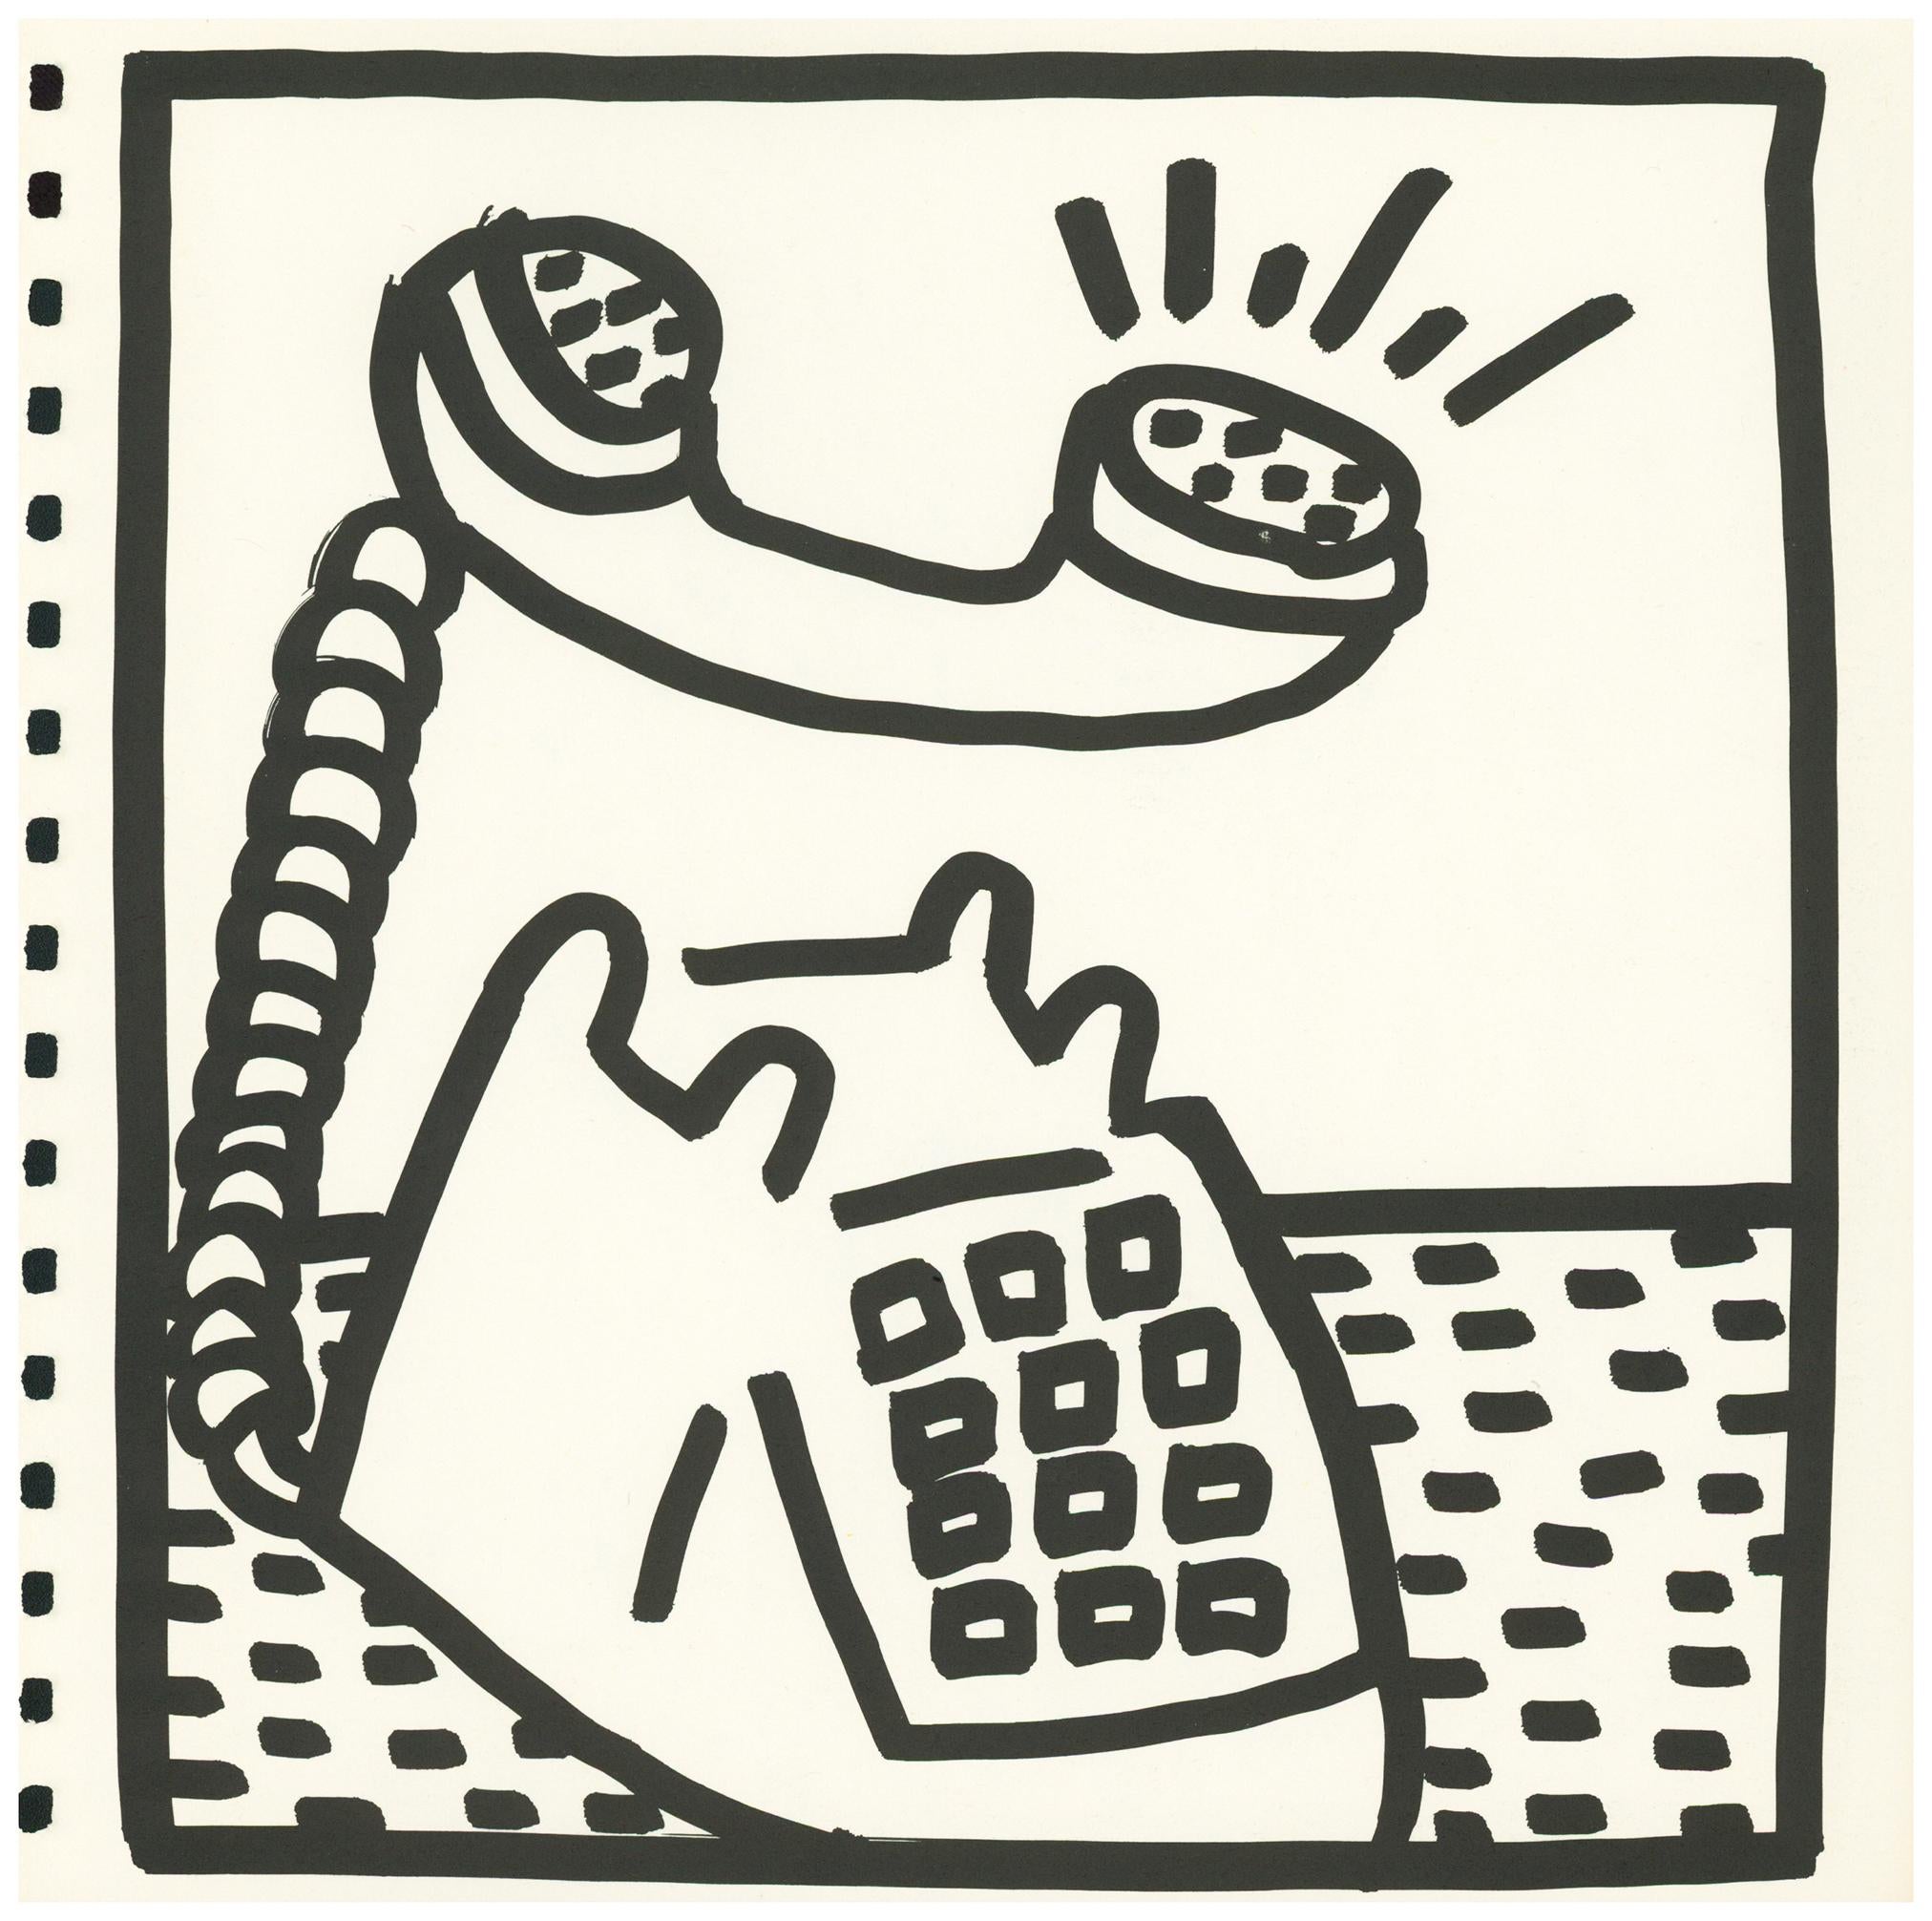 Keith Haring (untitled) Telephone lithograph 1982 (Keith Haring prints)  - Print by (after) Keith Haring